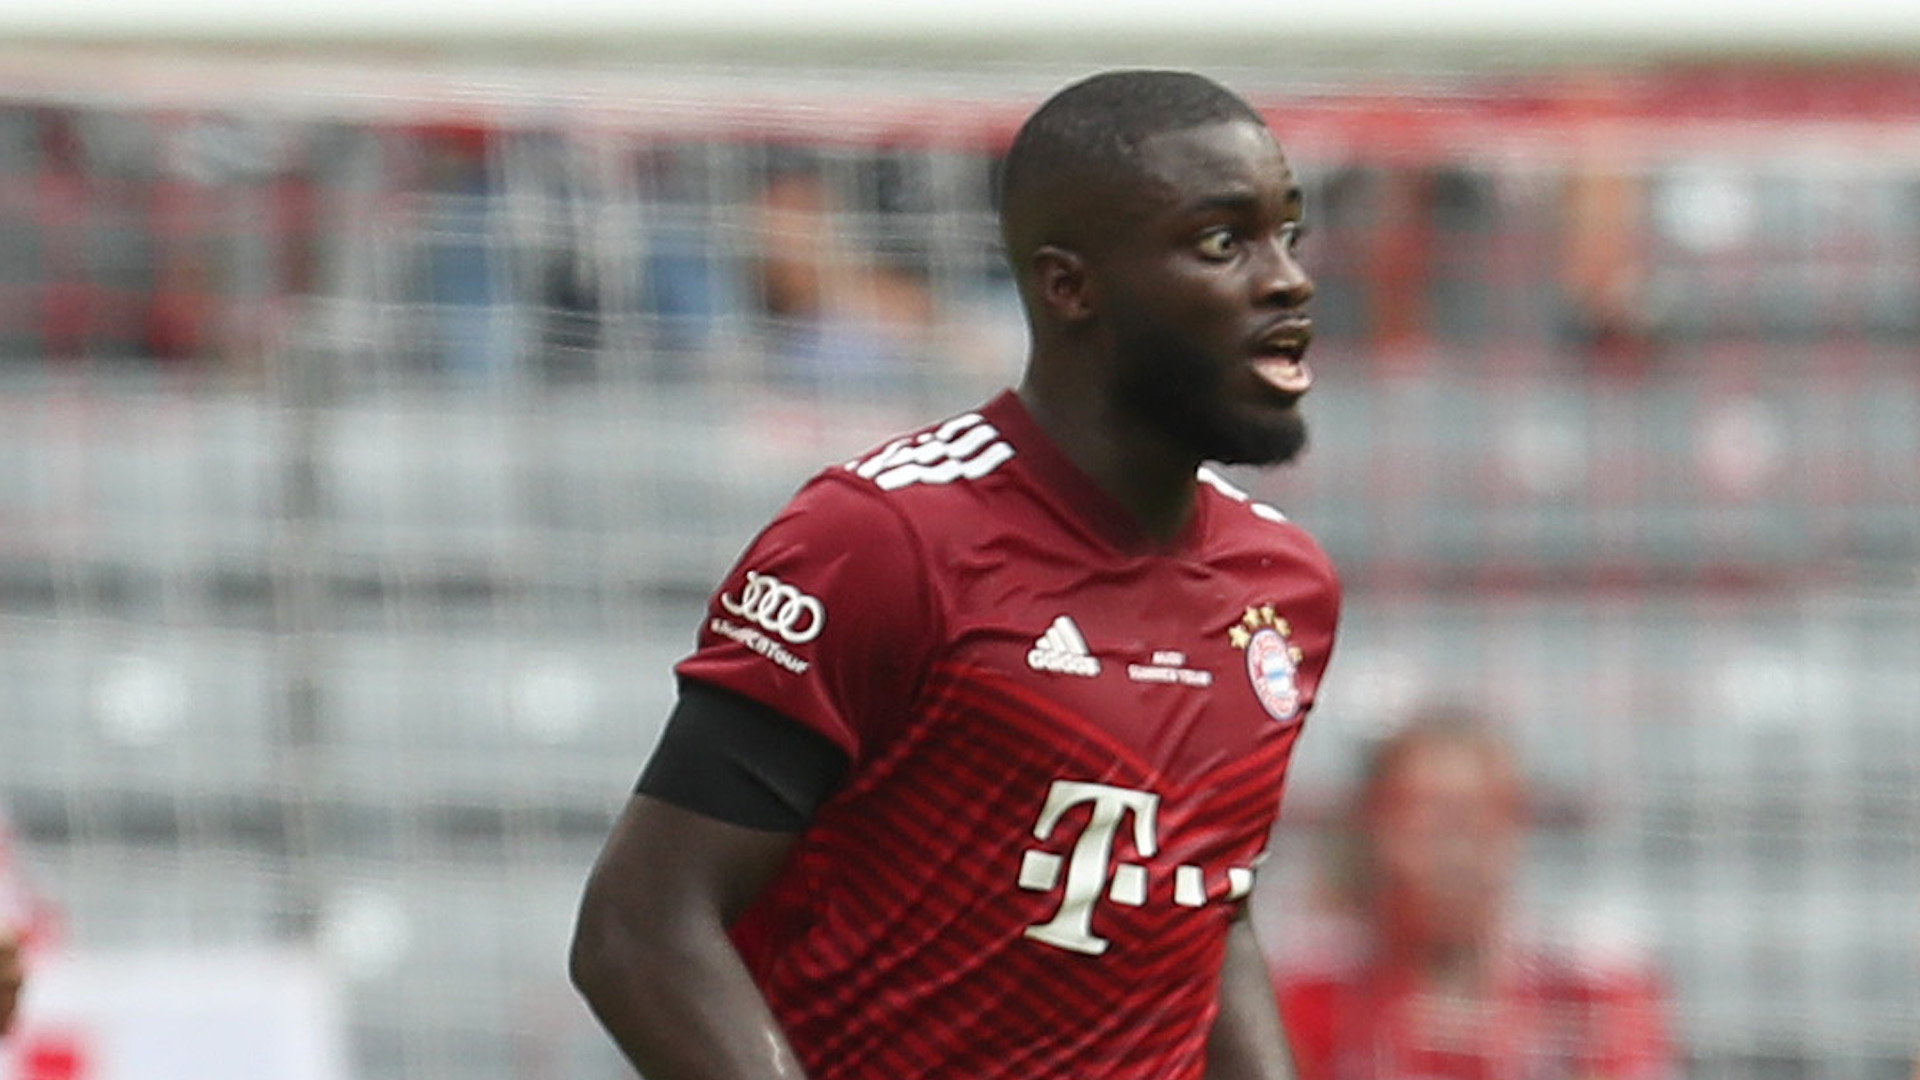 MUNICH, GERMANY - JULY 24: Dayot Upamecano of FC Bayern Muenchen controls the ball during the Audi Football Summit match between FC Bayern Muenchen and Ajax Amsterdam at Allianz Arena on July 24, 2021 in Munich, Germany. (Photo by Alexandra Beier/Getty Images)